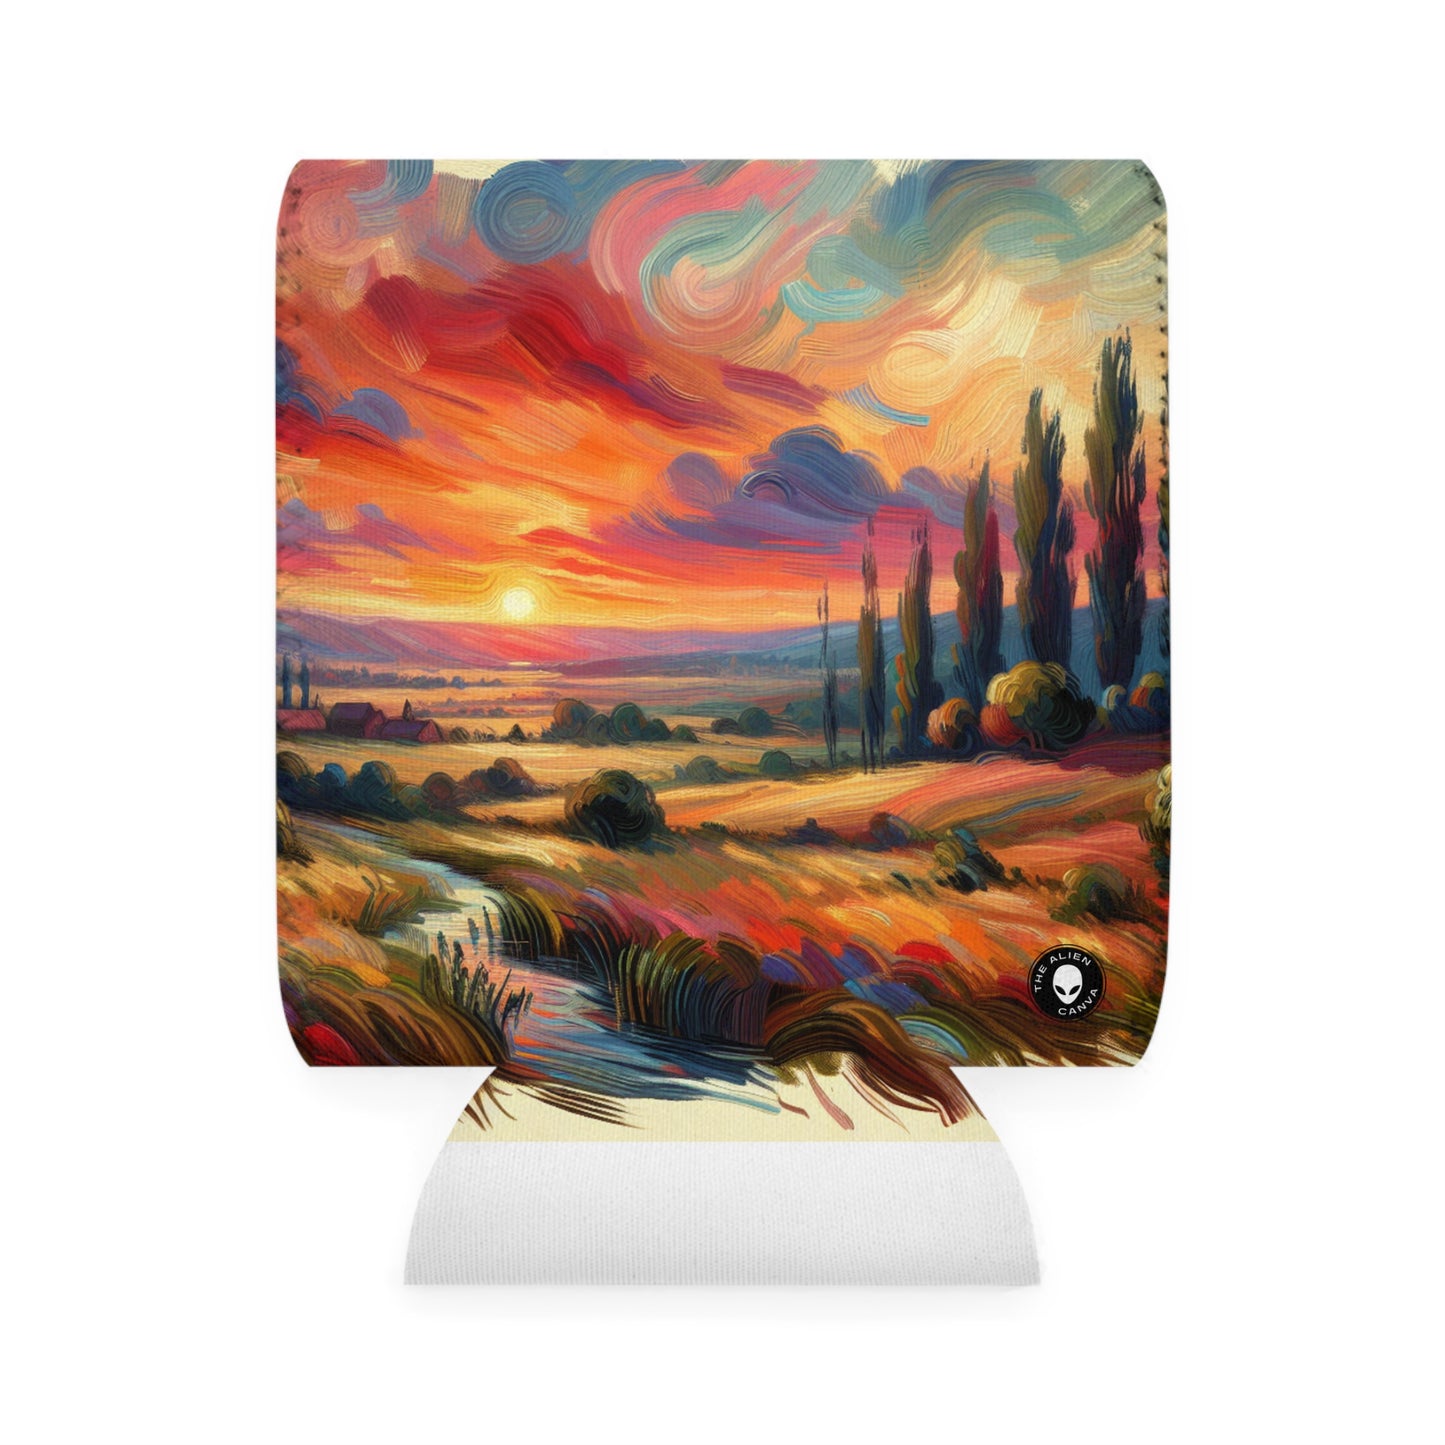 "Harmonious Vistas: A Post-Impressionist Celebration of Nature and Rural Life" - The Alien Can Cooler Sleeve Post-Impressionism